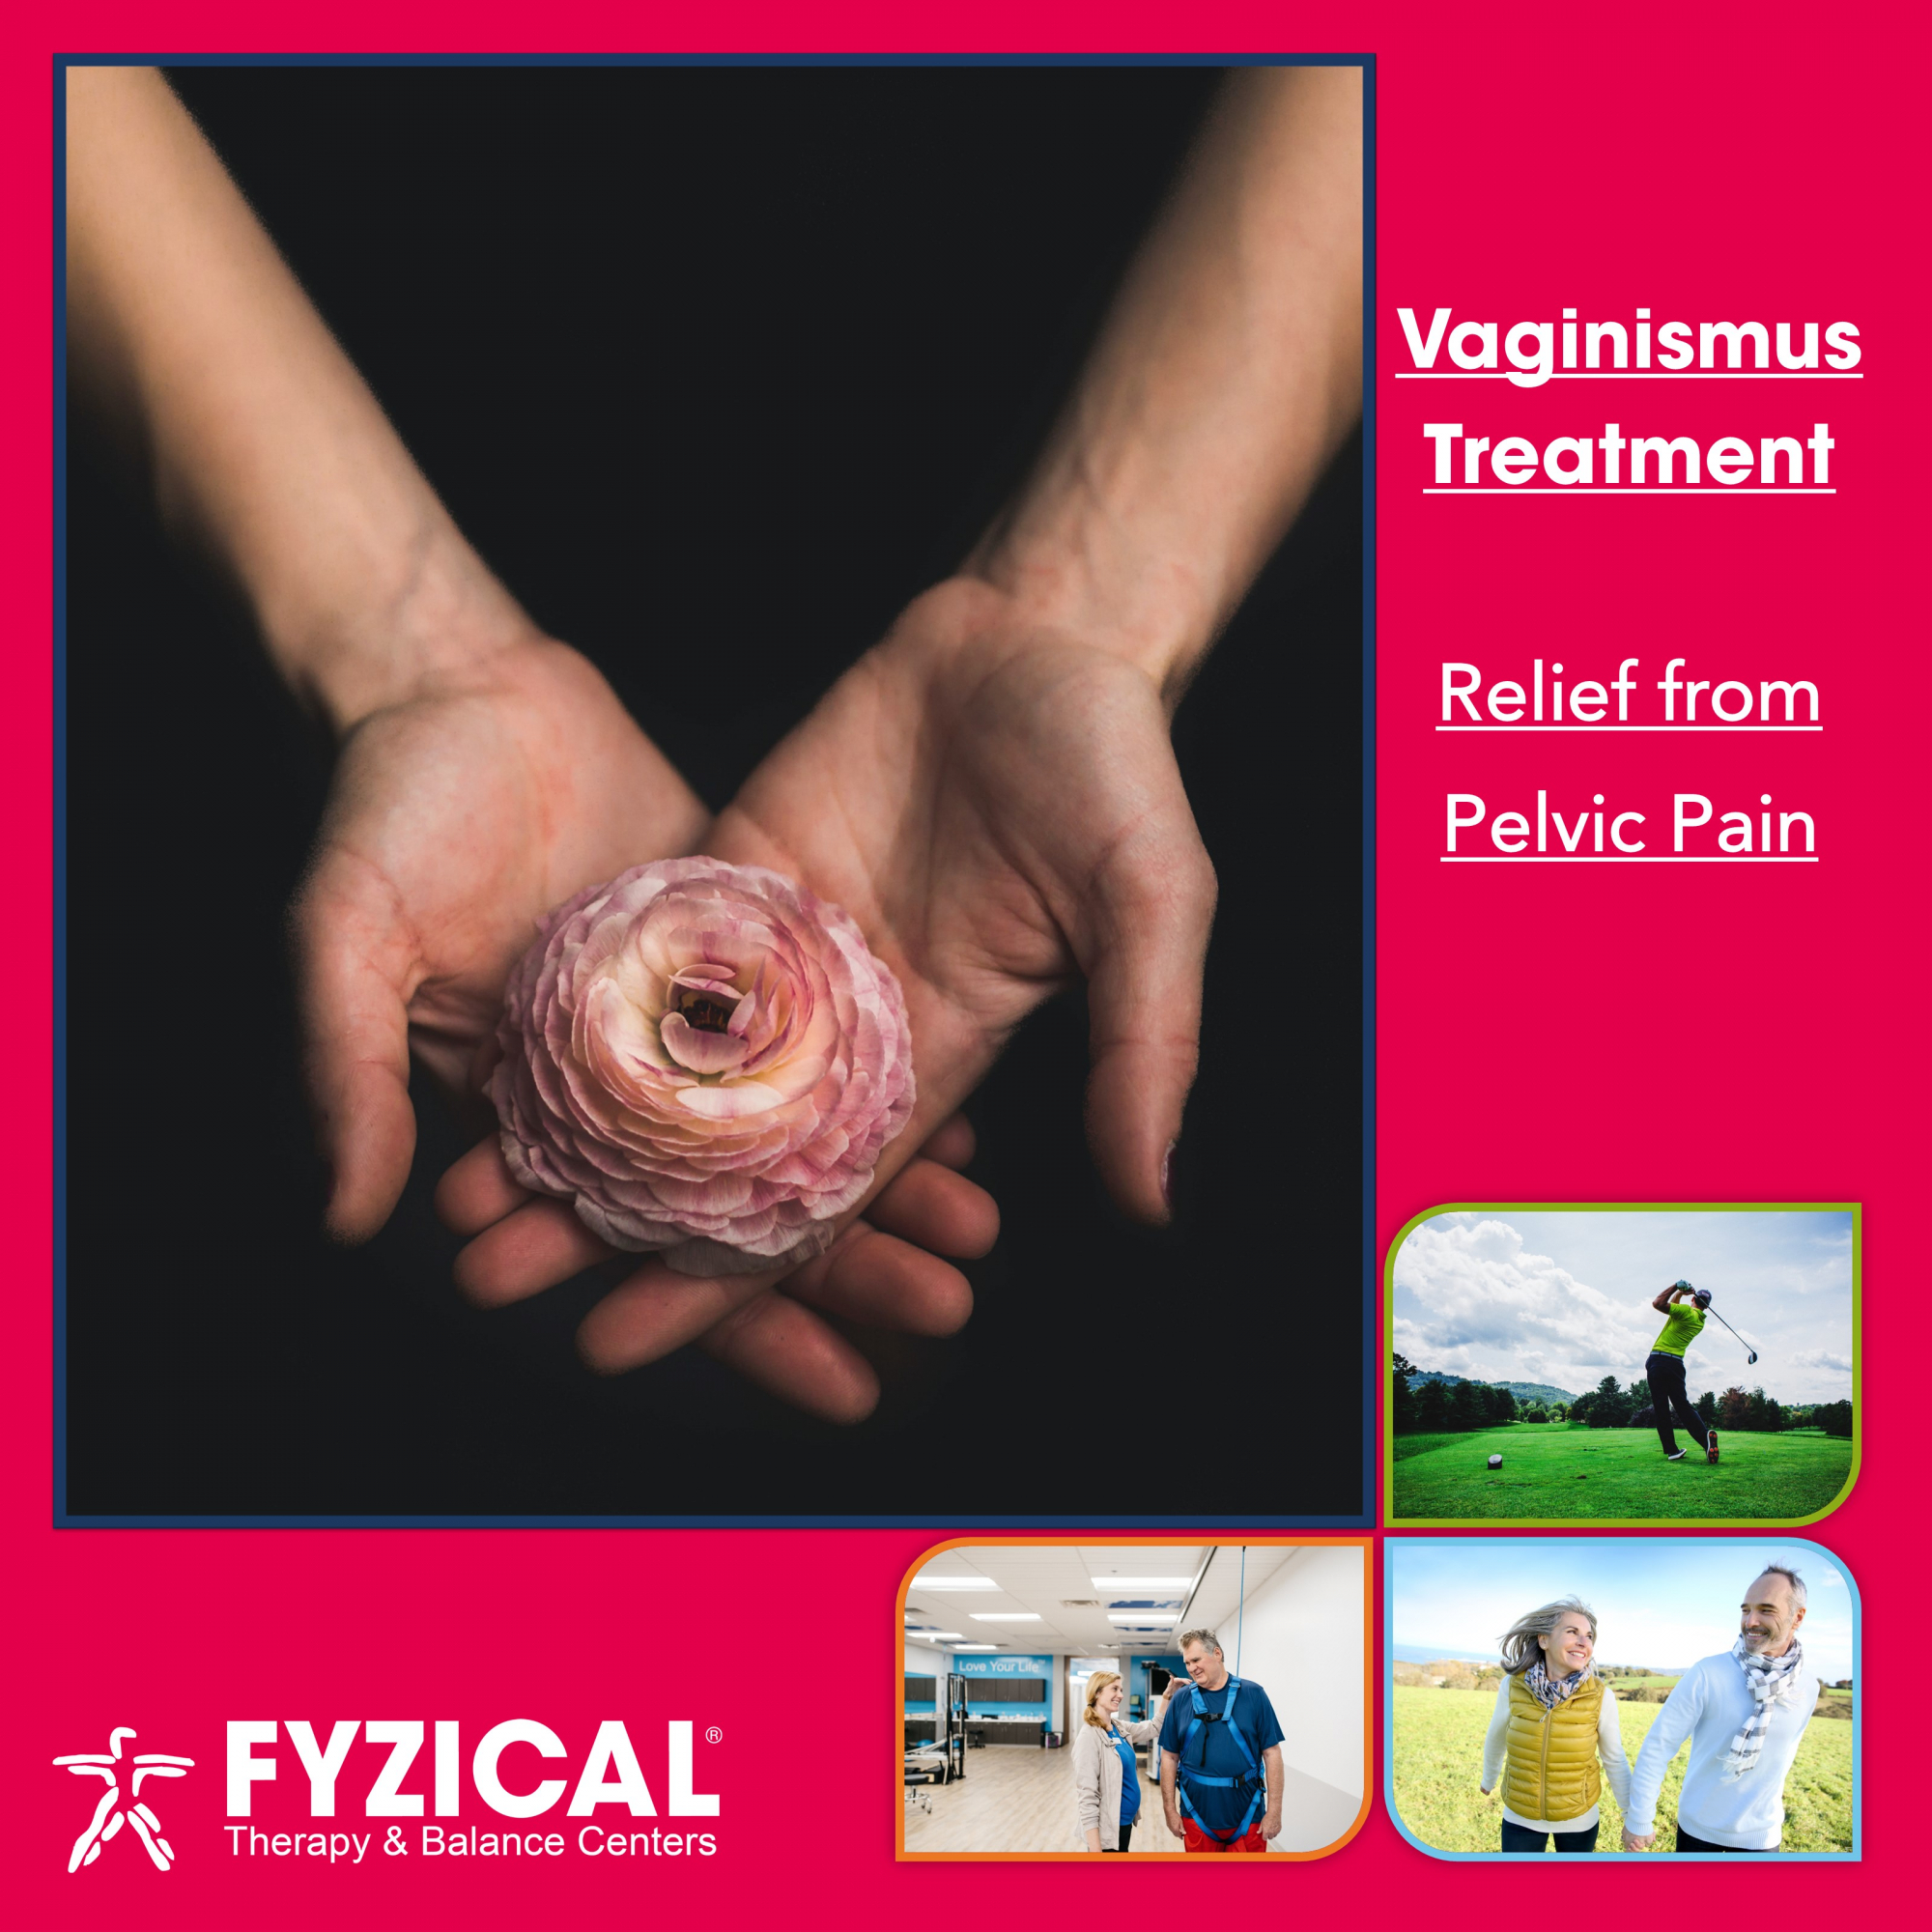 Treatment for Vaginismus in Oklahoma City with a Pelvic Floor Physical Therapist at FYZICAL Oklahoma City.